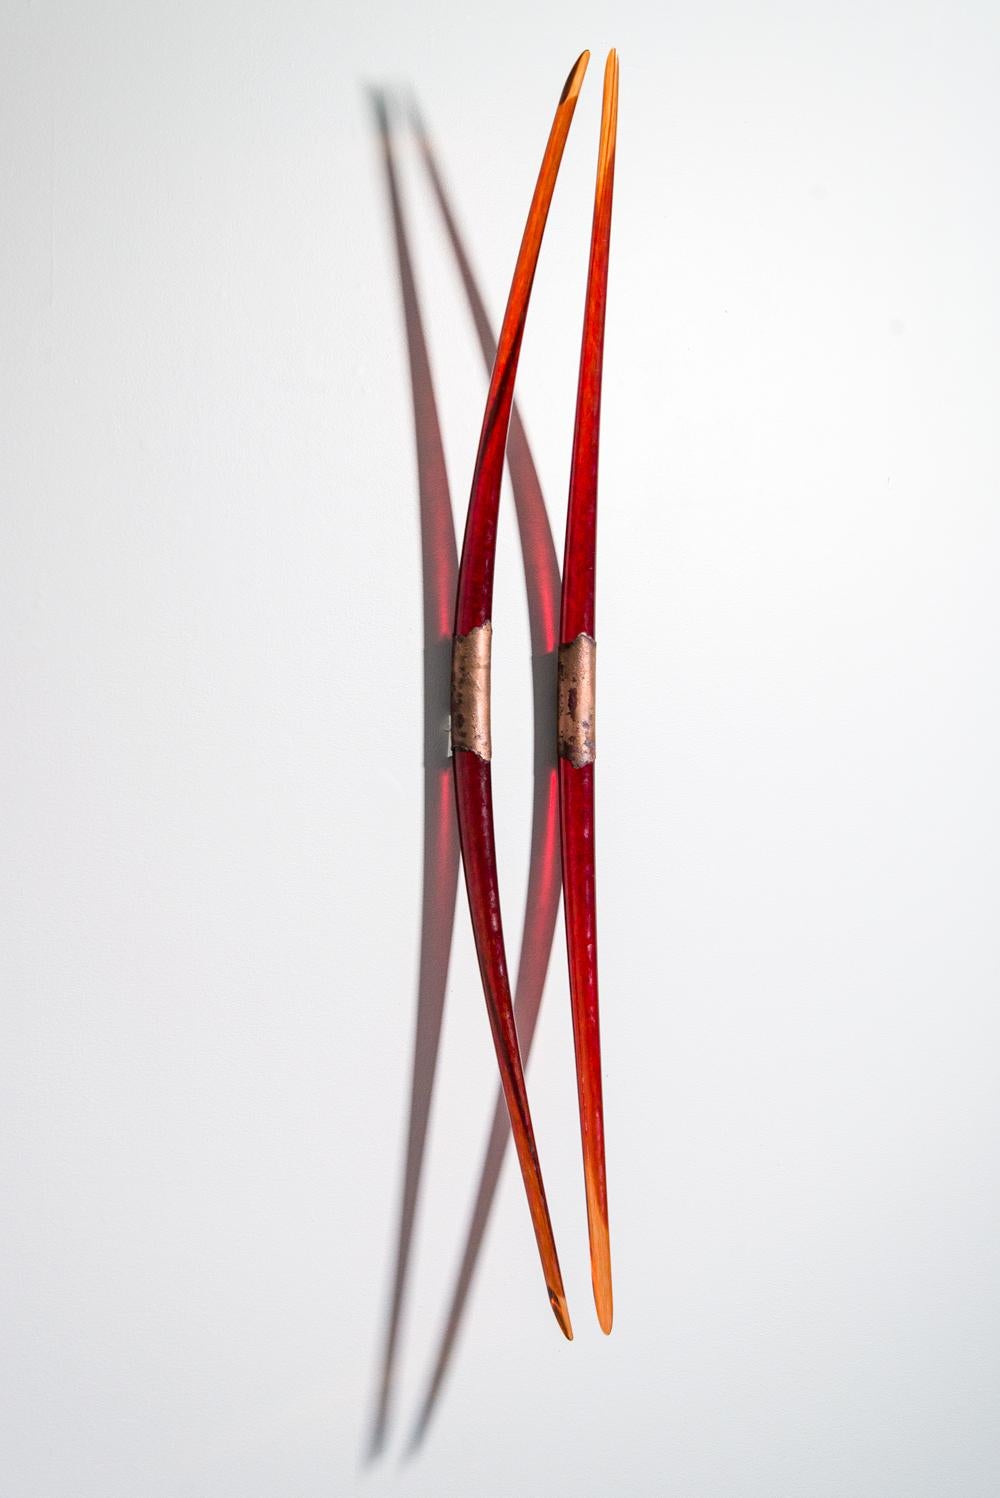 Dual Symmetry - translucent, red, glass, copper, abstract wall sculpture - Sculpture by John Paul Robinson